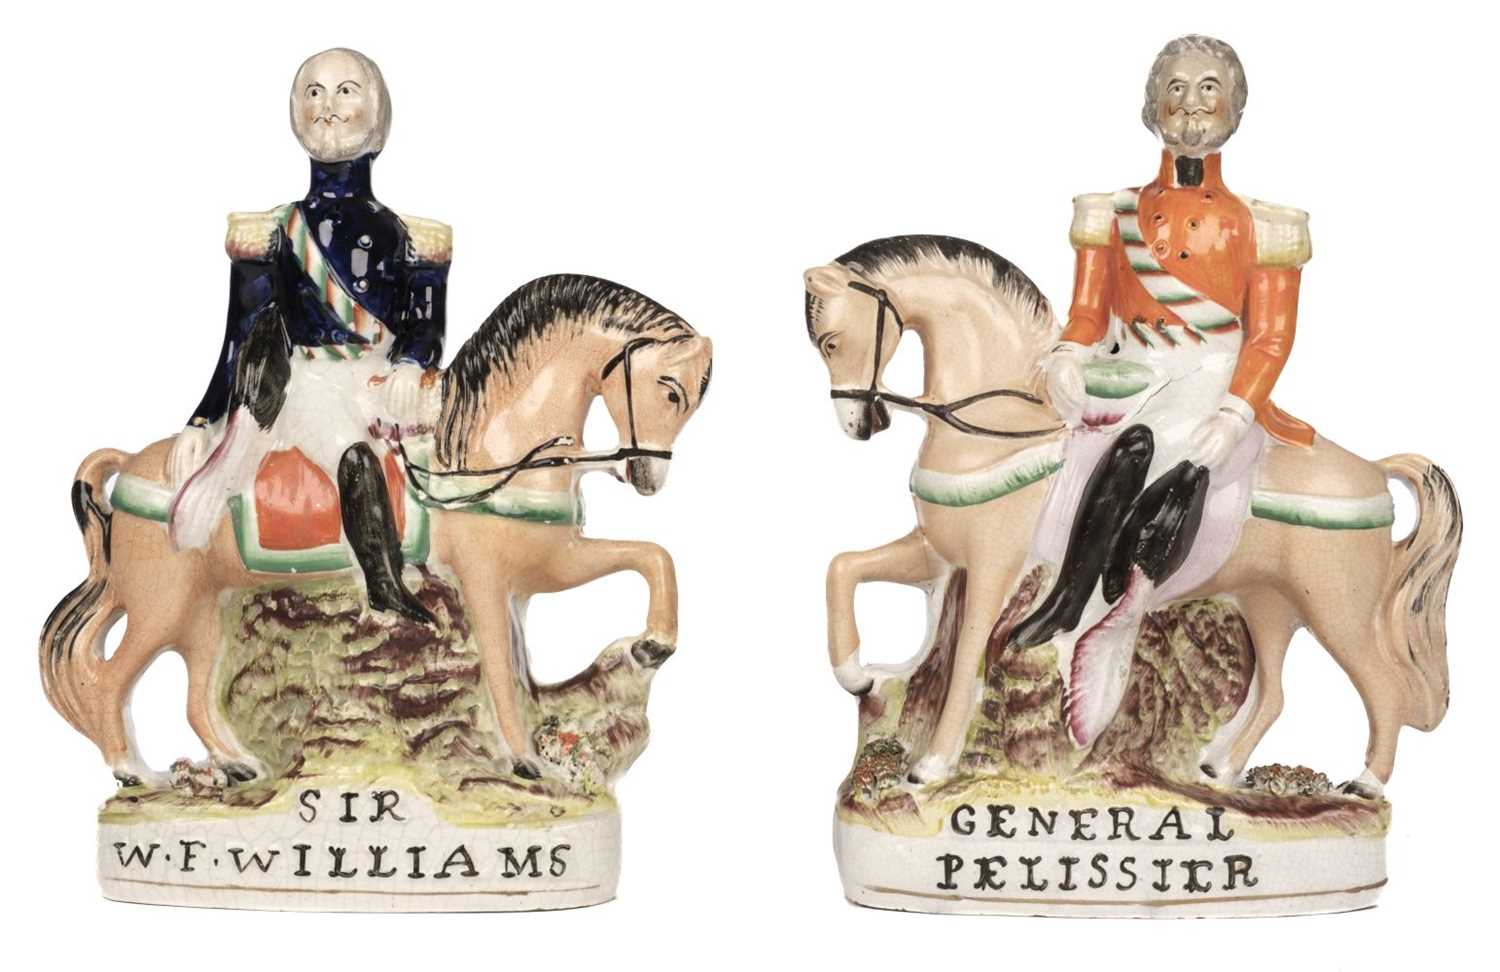 Lot 314 - Military Figures. A Victorian Staffordshire figure Sir W.F. Williams and General Pelissier